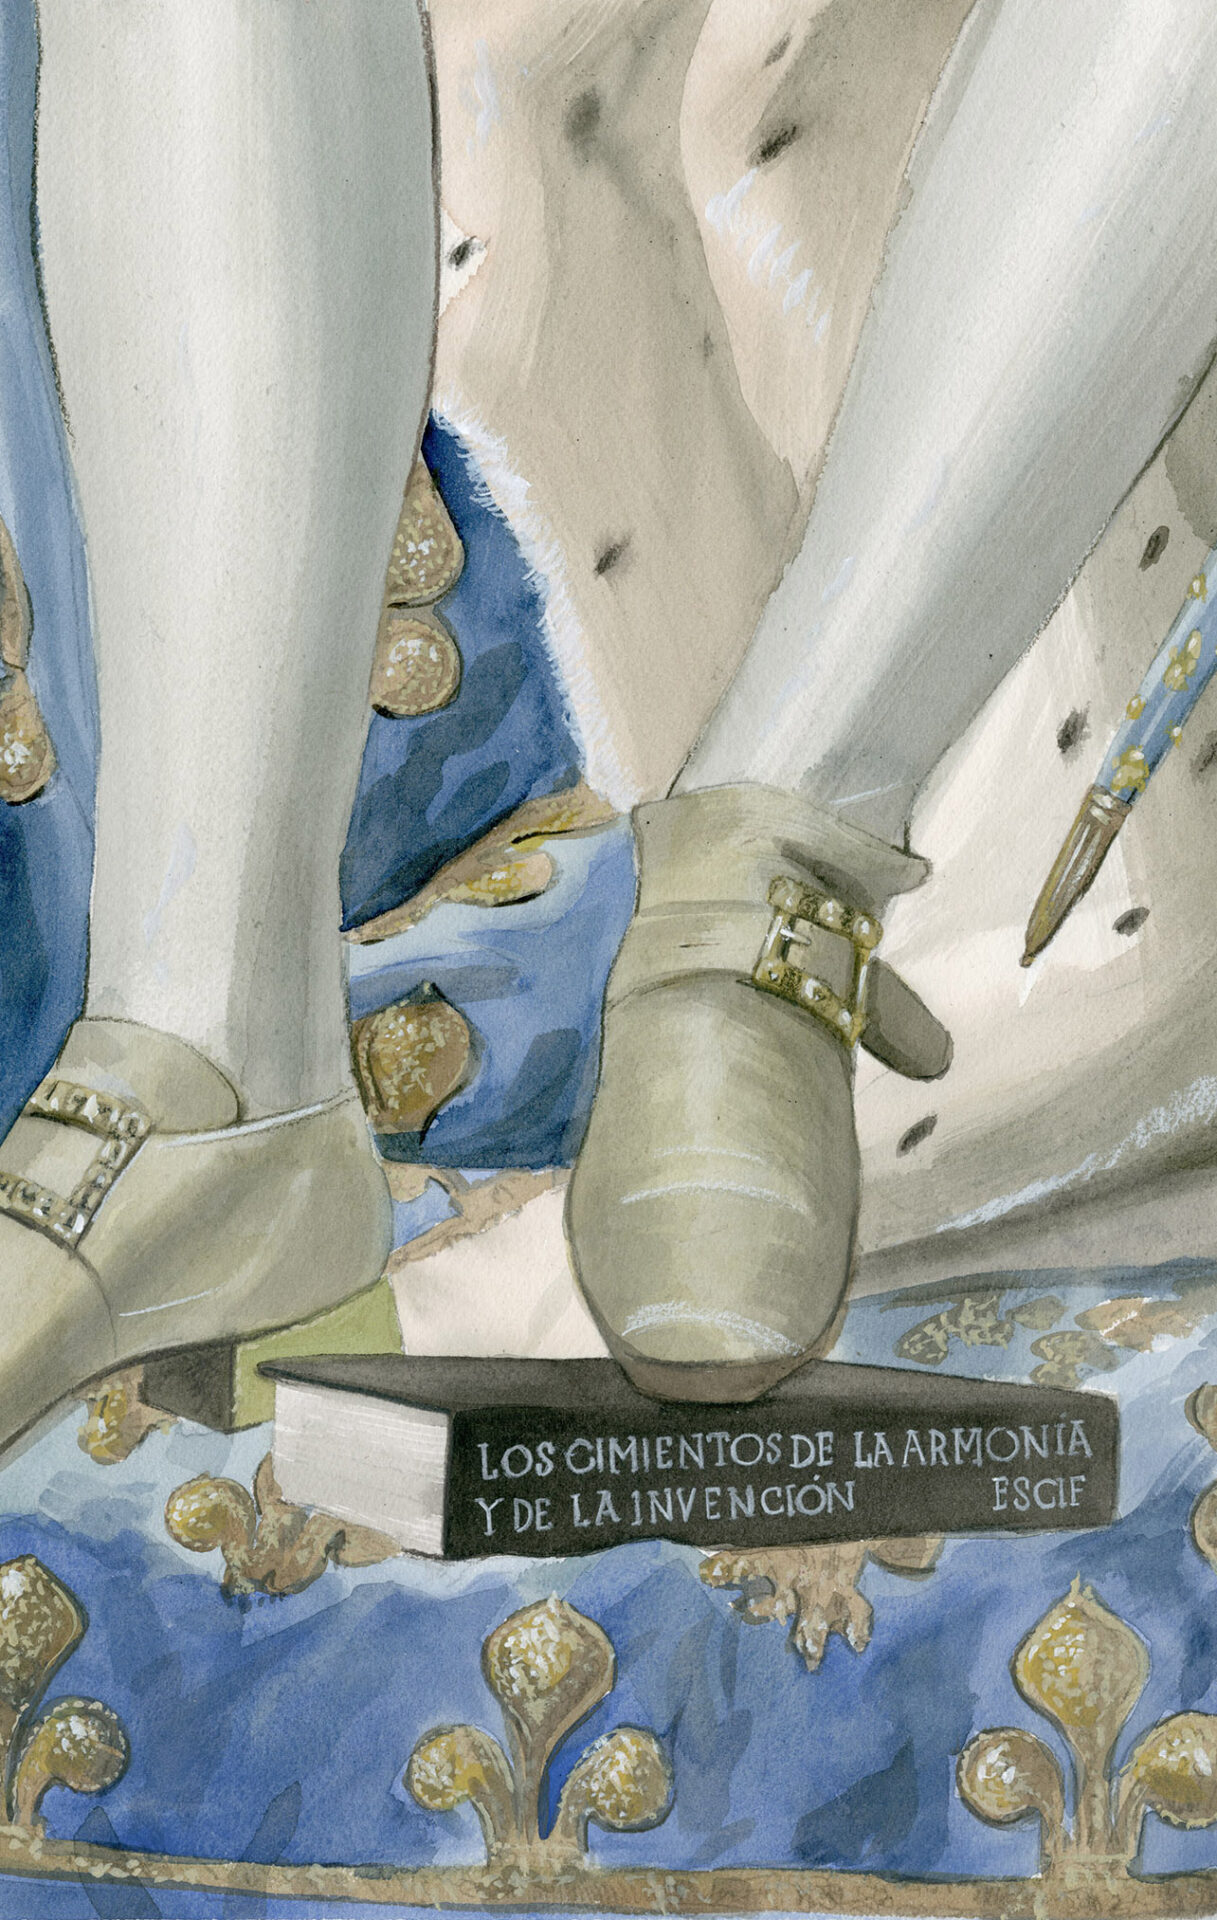 a painting of an anonymous 18th-century royal man's legs and shoes, stepping on a black book